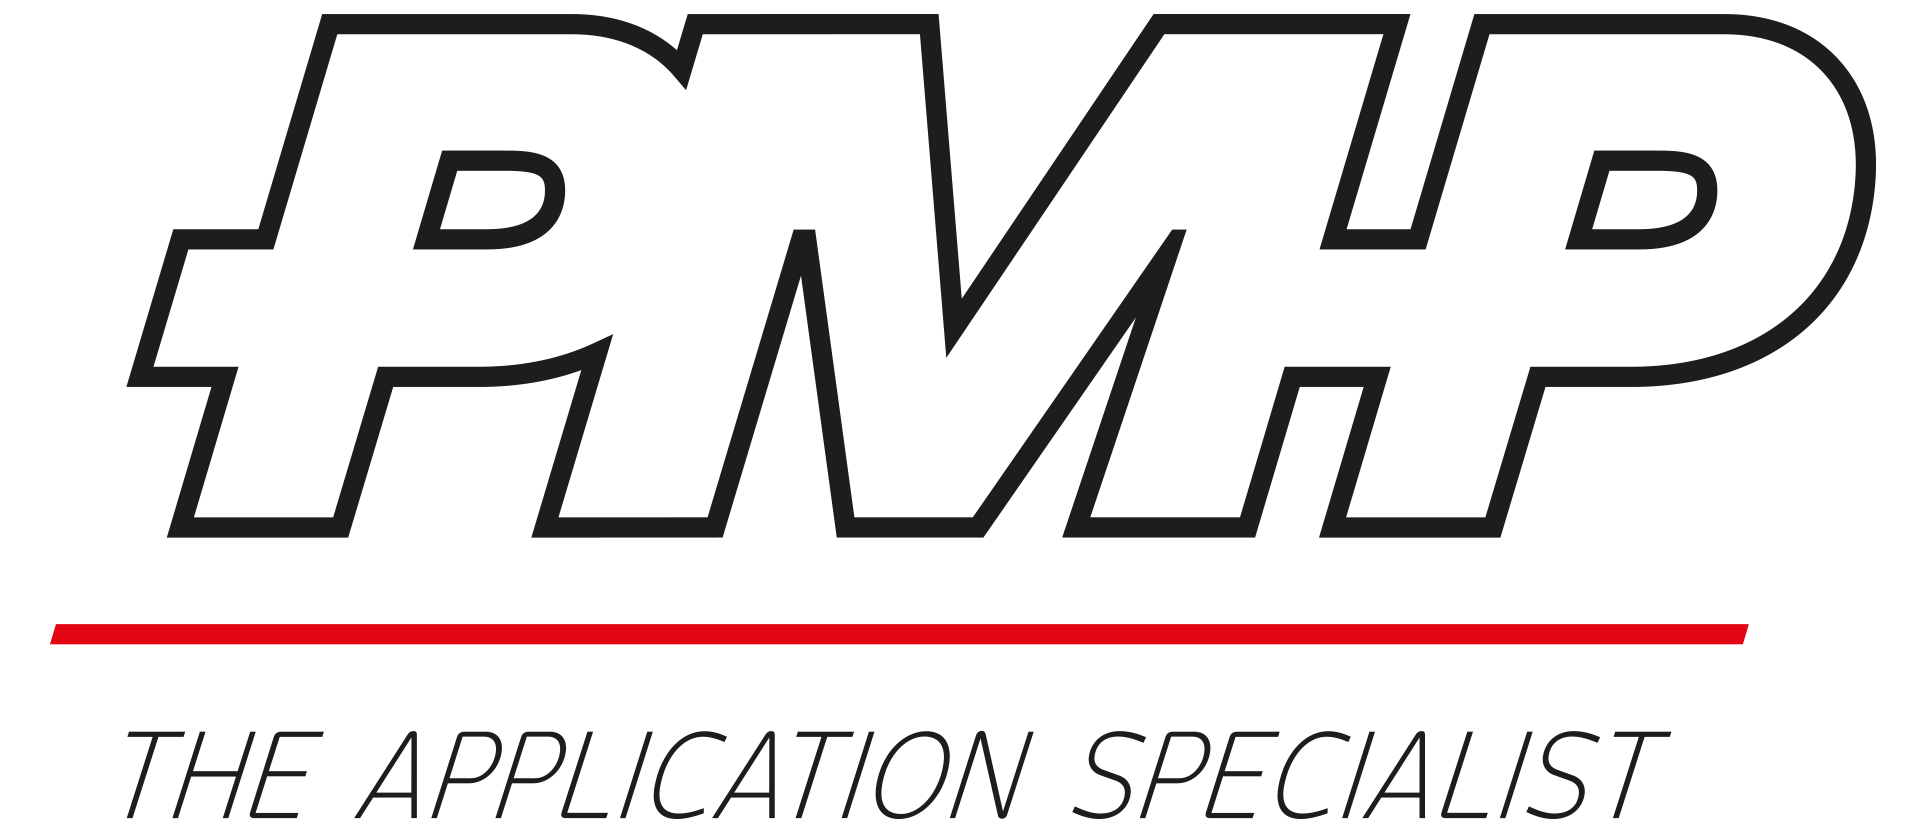 PMP - The Application Specialist